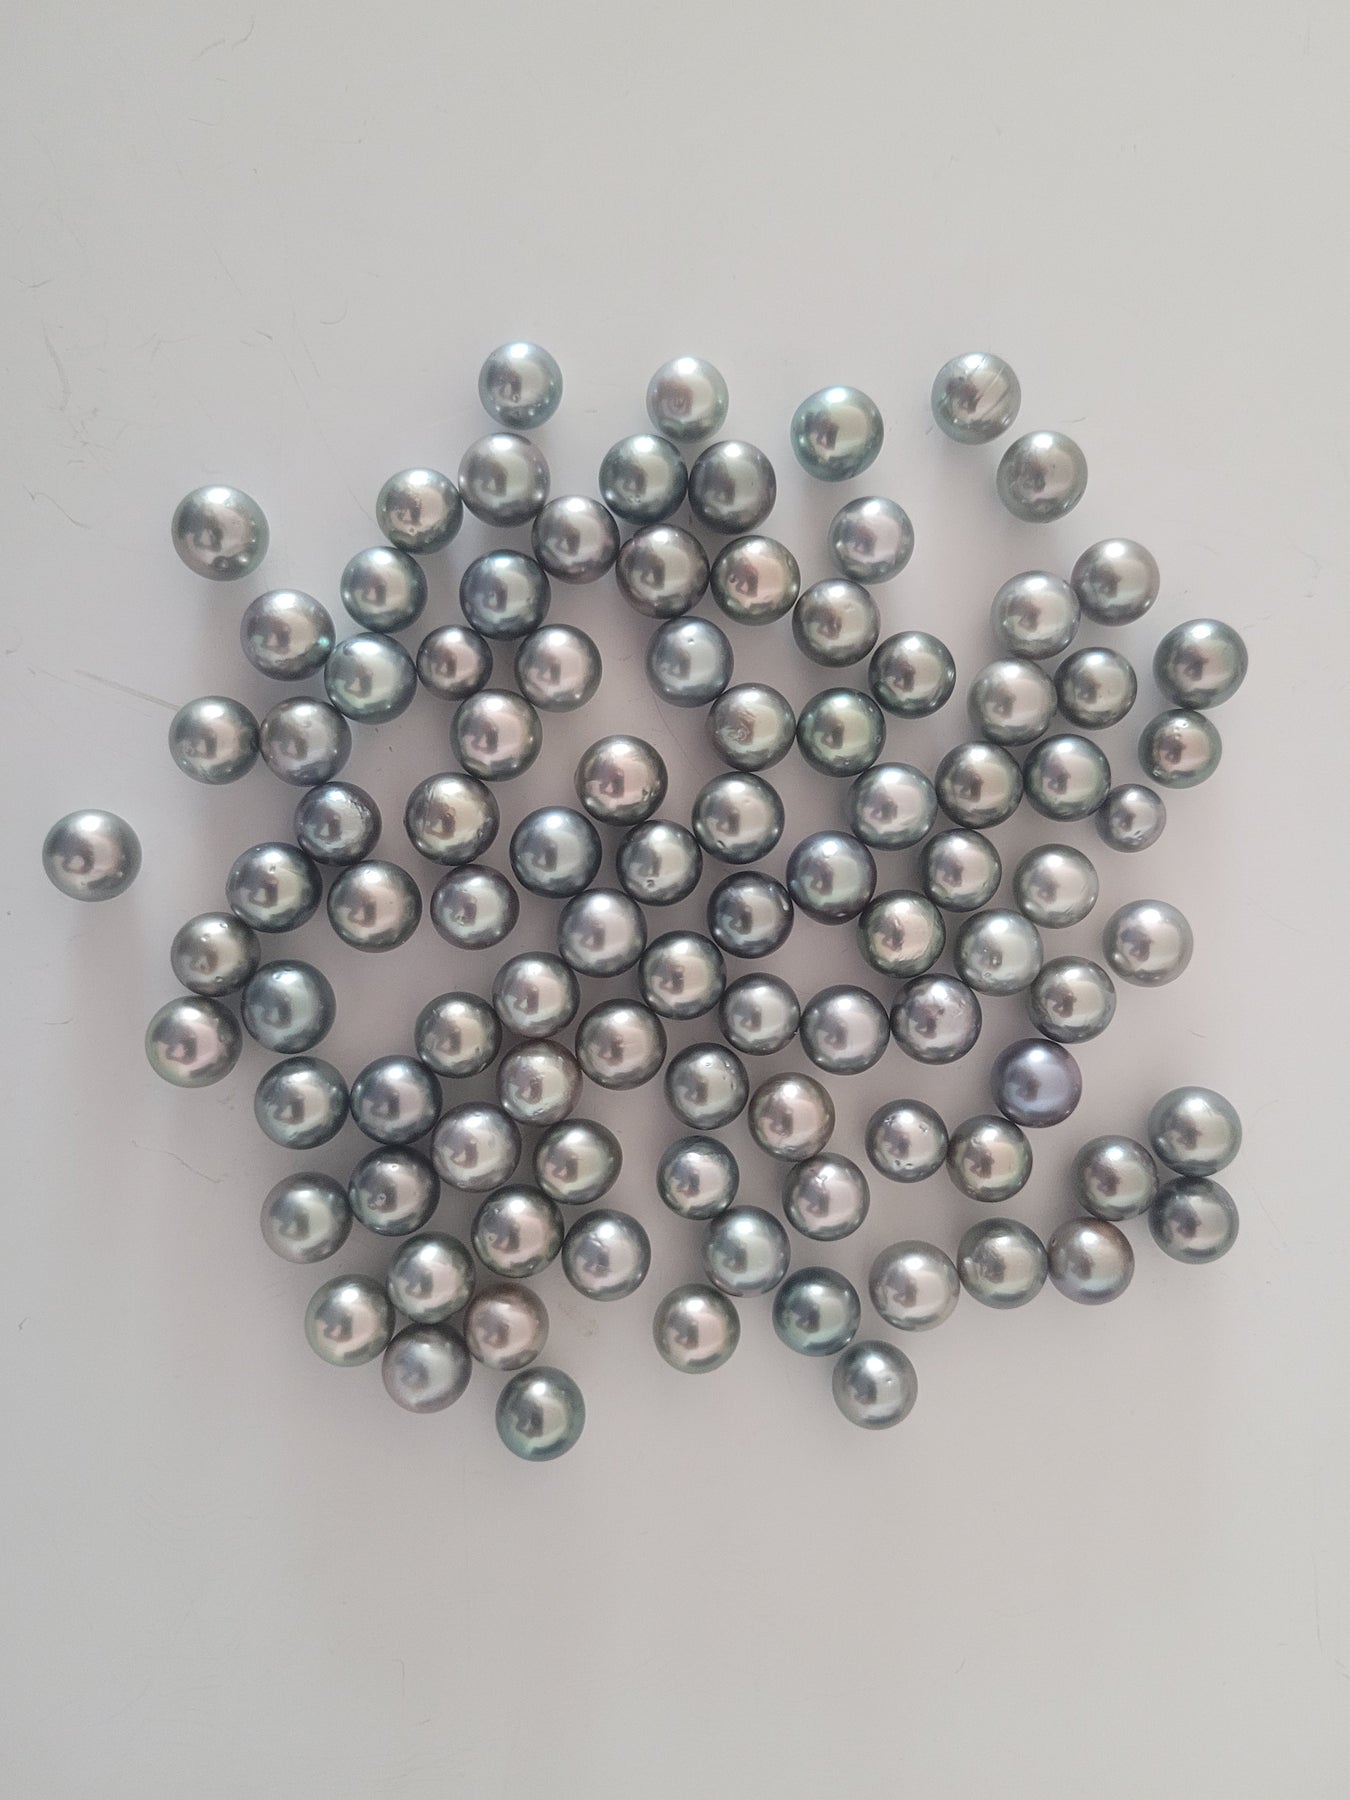 Loose South Sea Pearls at Wholesale Prices | The South Sea Pearl